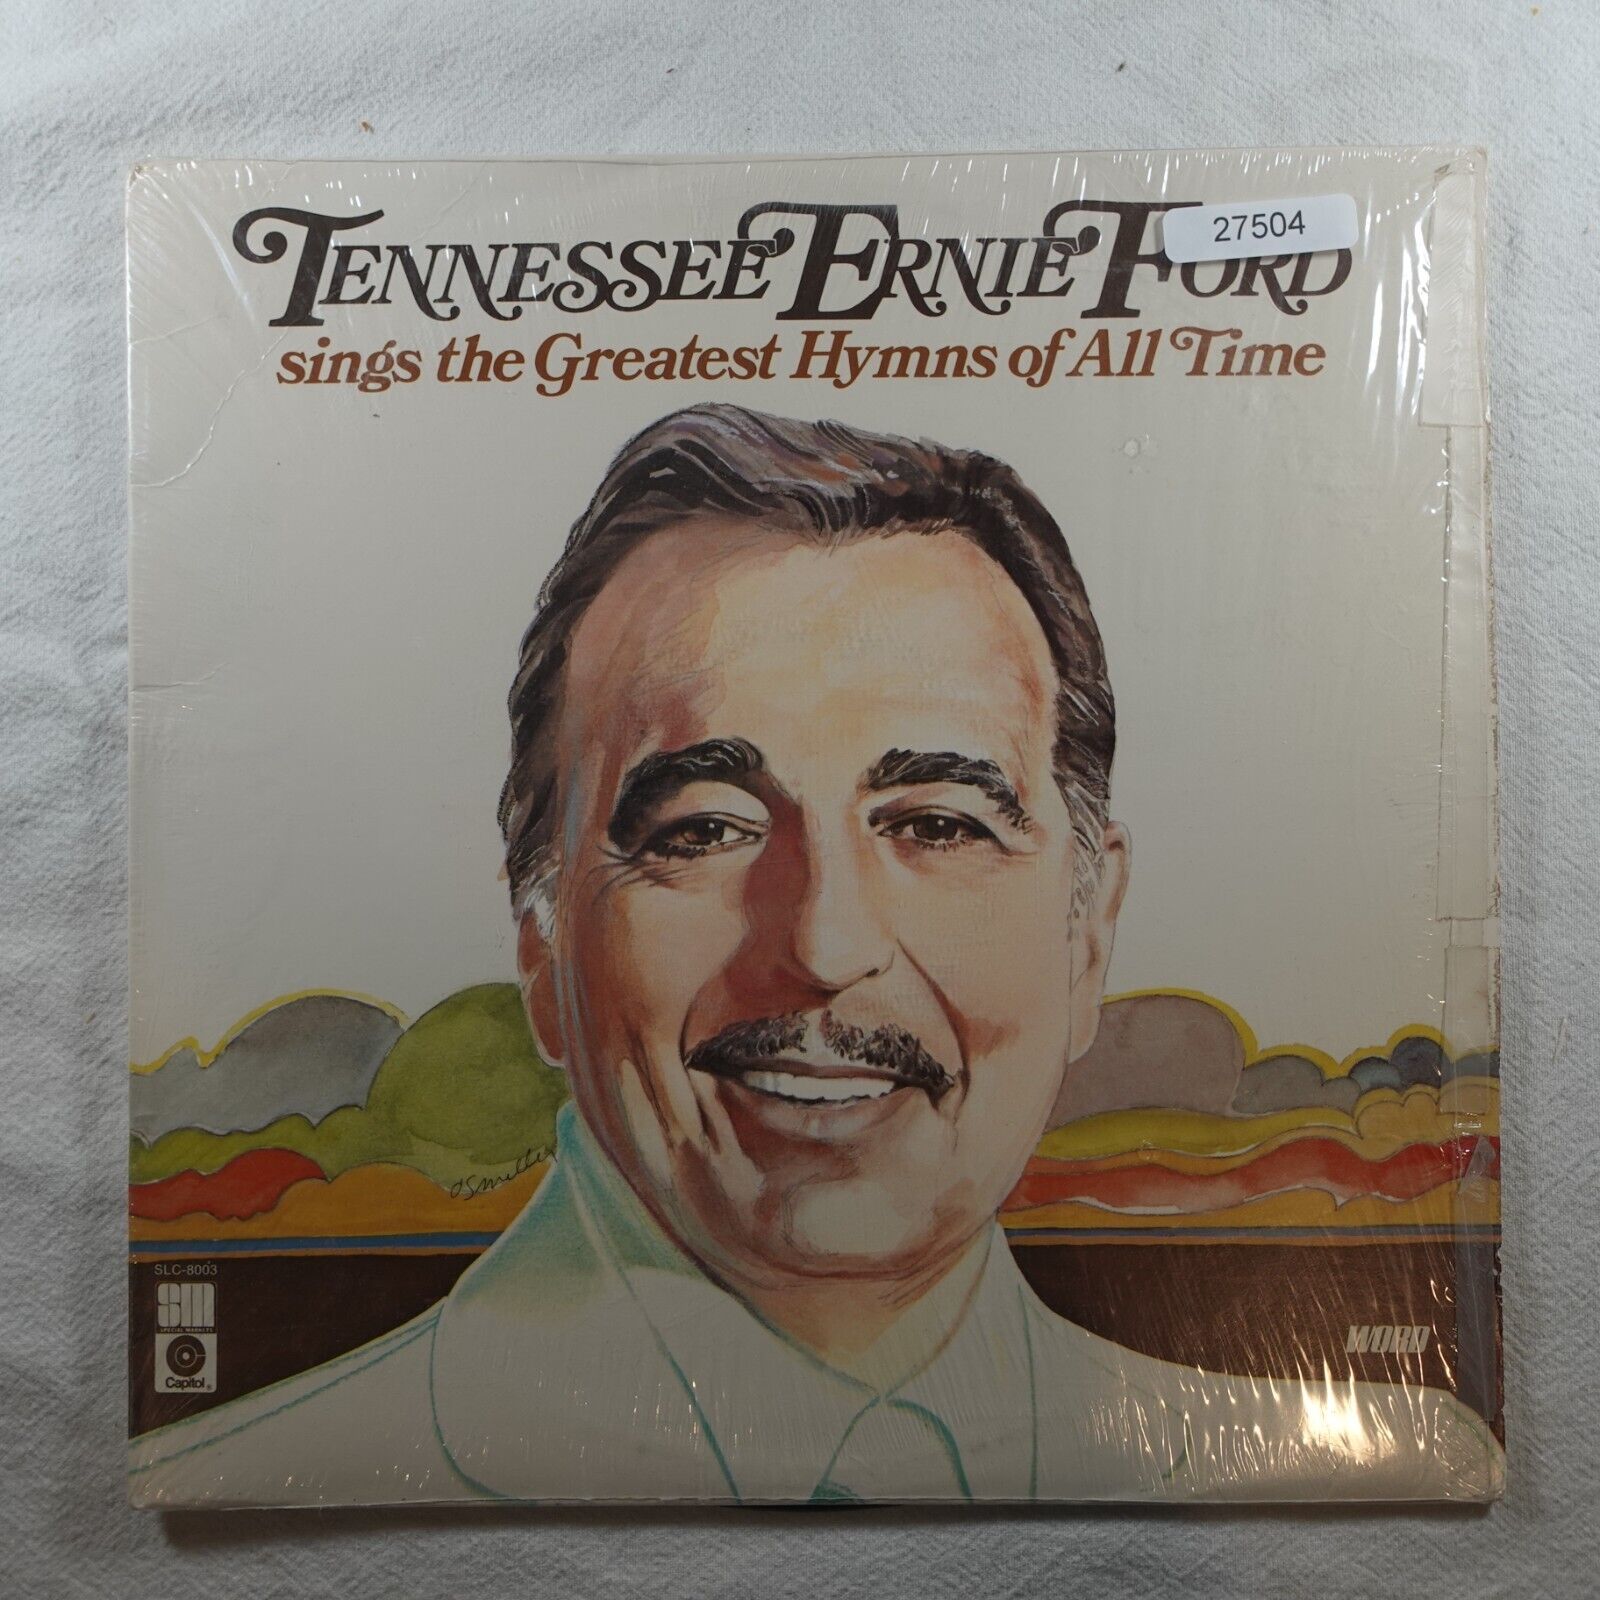 Tennessee Ernie Ford The Greatest Hymns Of All Time w/ Shrink LP Vinyl Record A